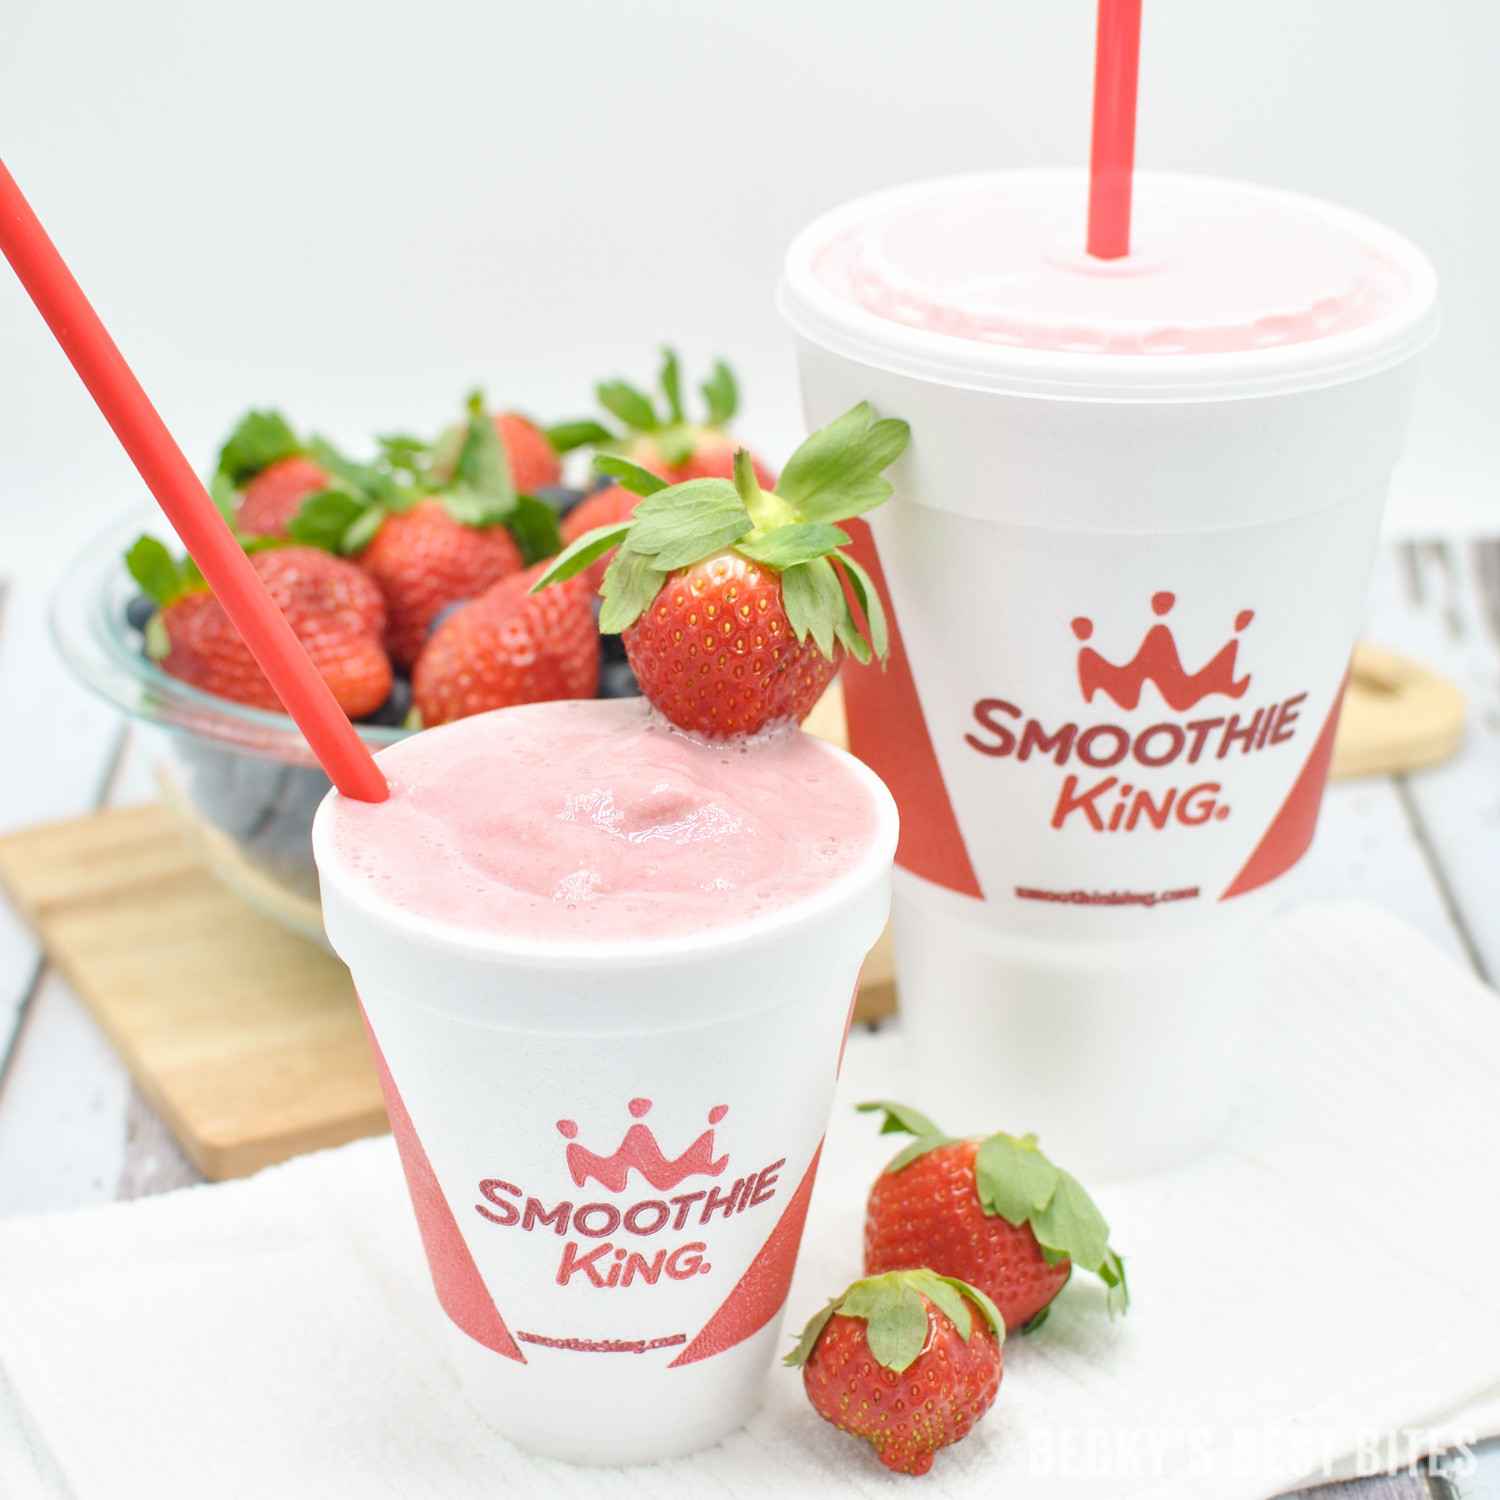 Smoothie King Meal Replacement Smoothies
 Change A Meal Challenge with Smoothie King